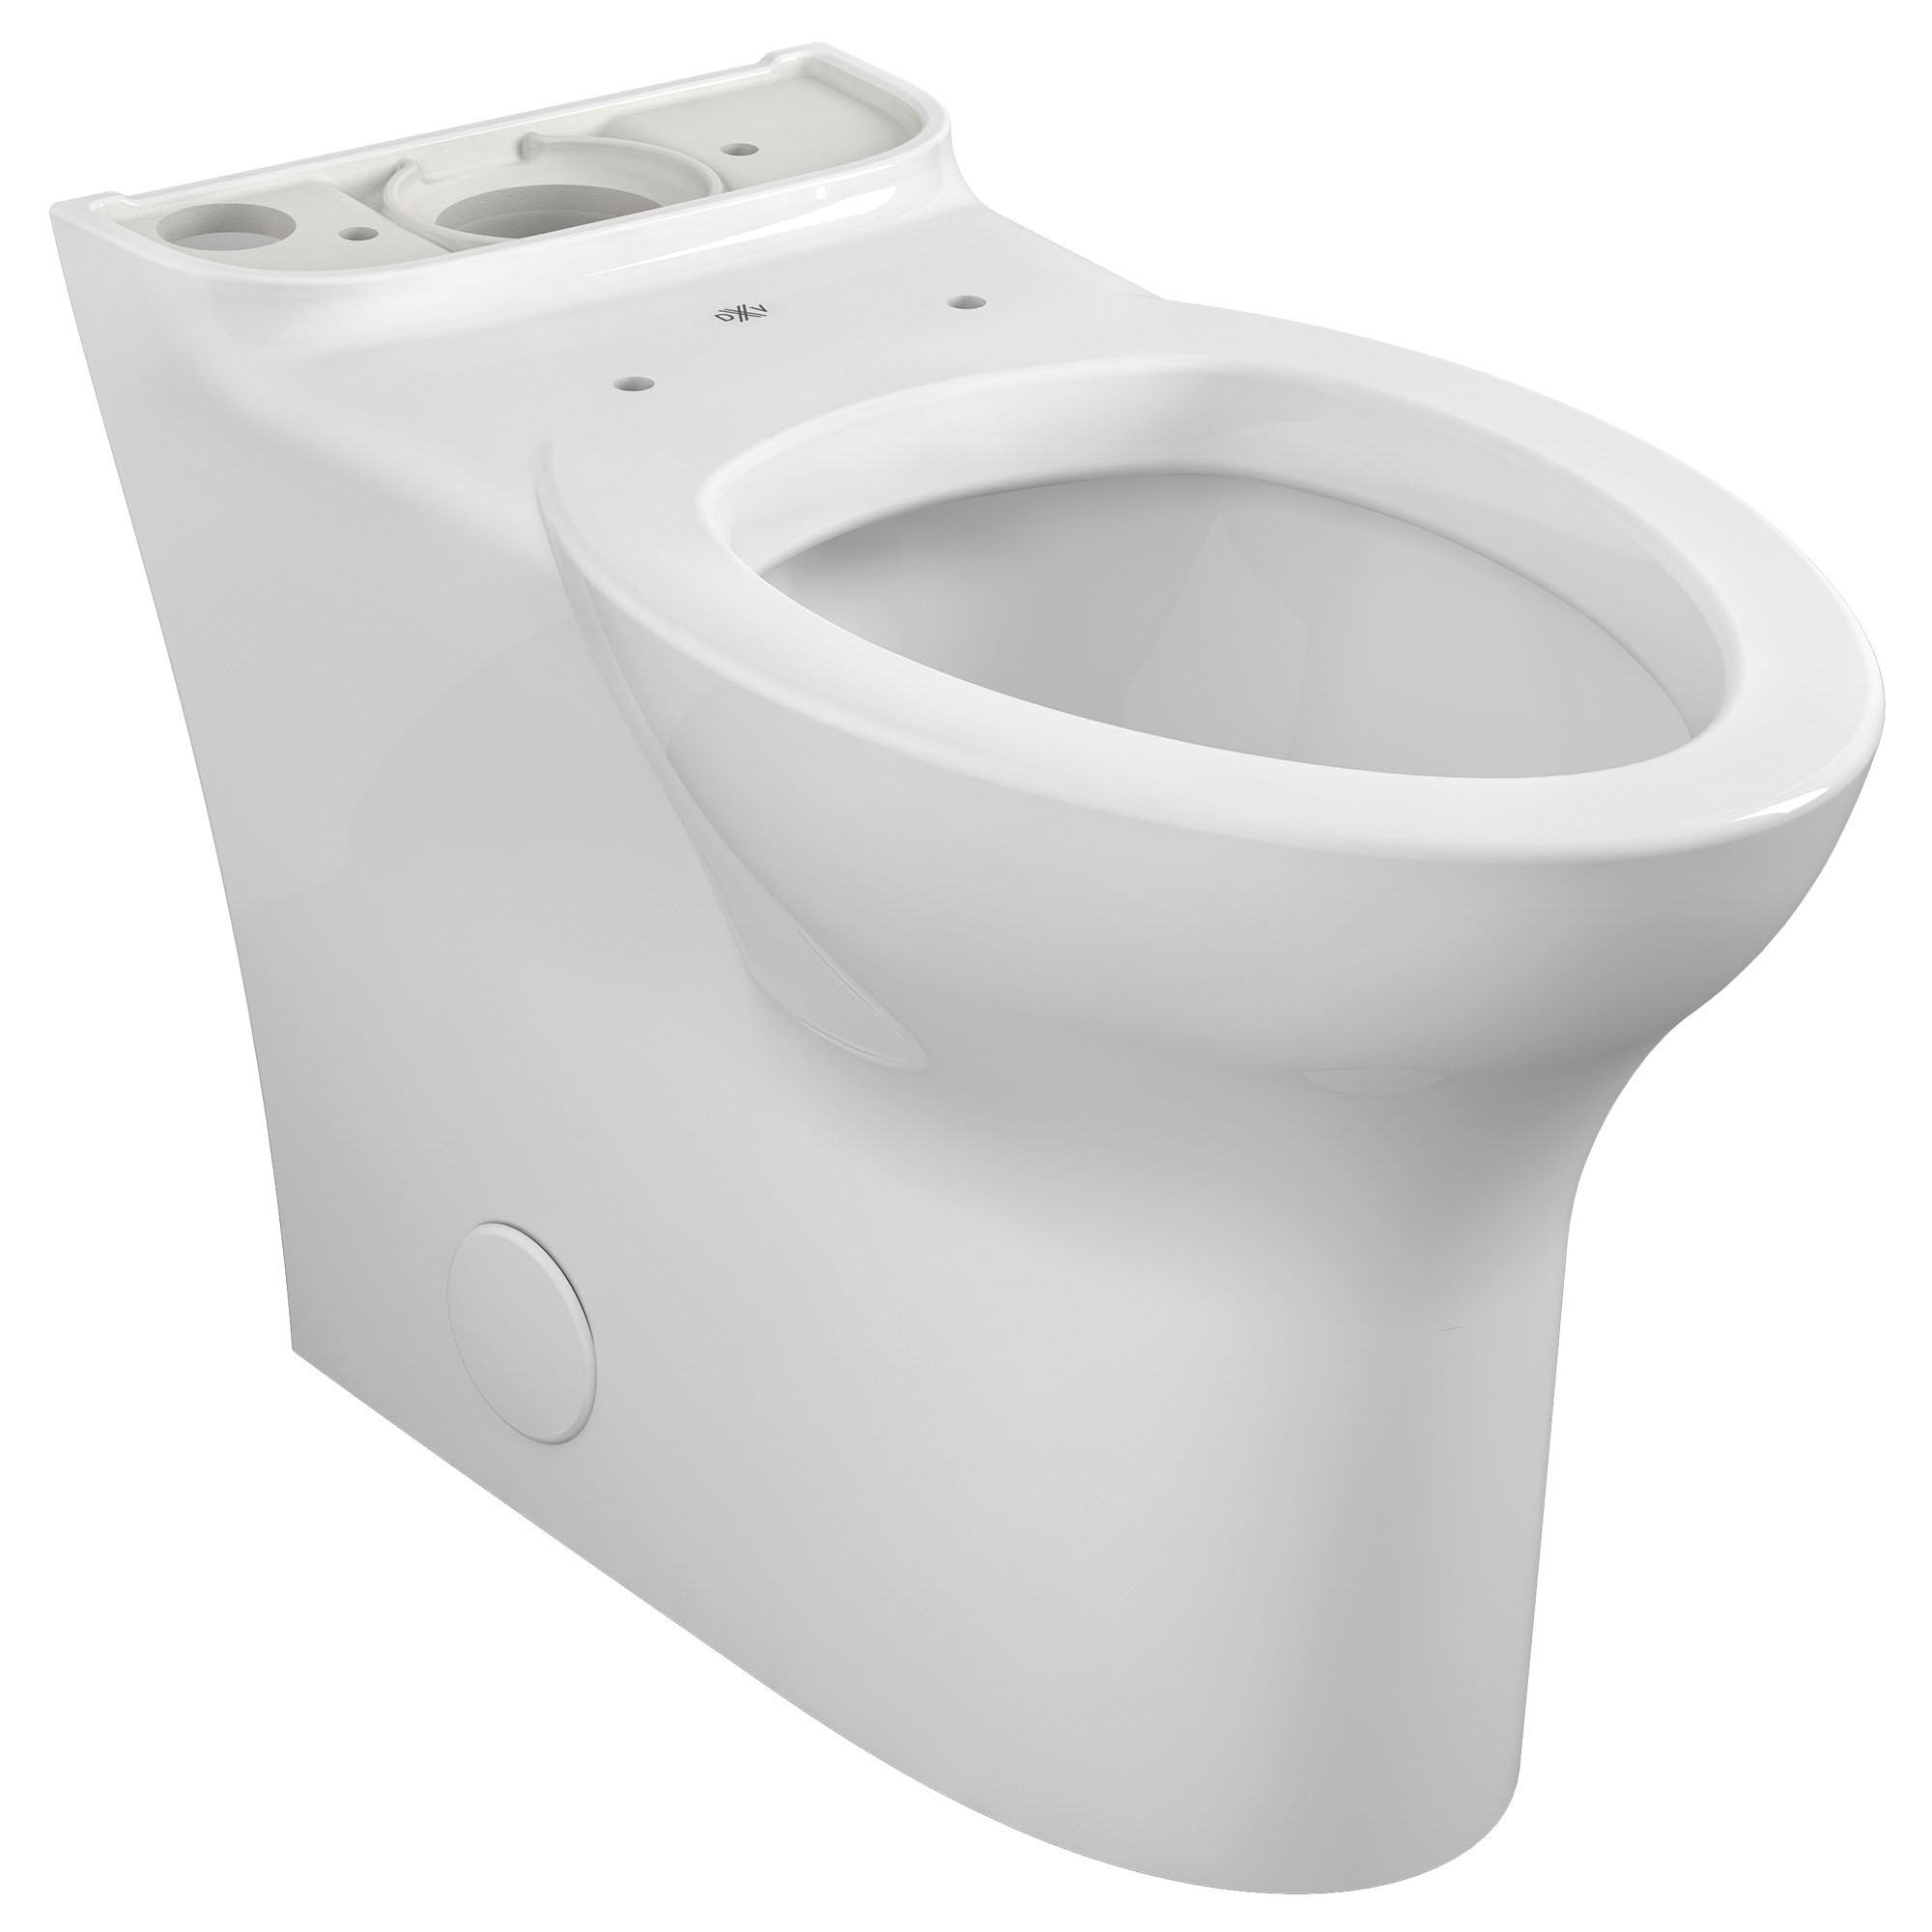 Equility® Chair-Height Elongated Toilet Bowl with Seat